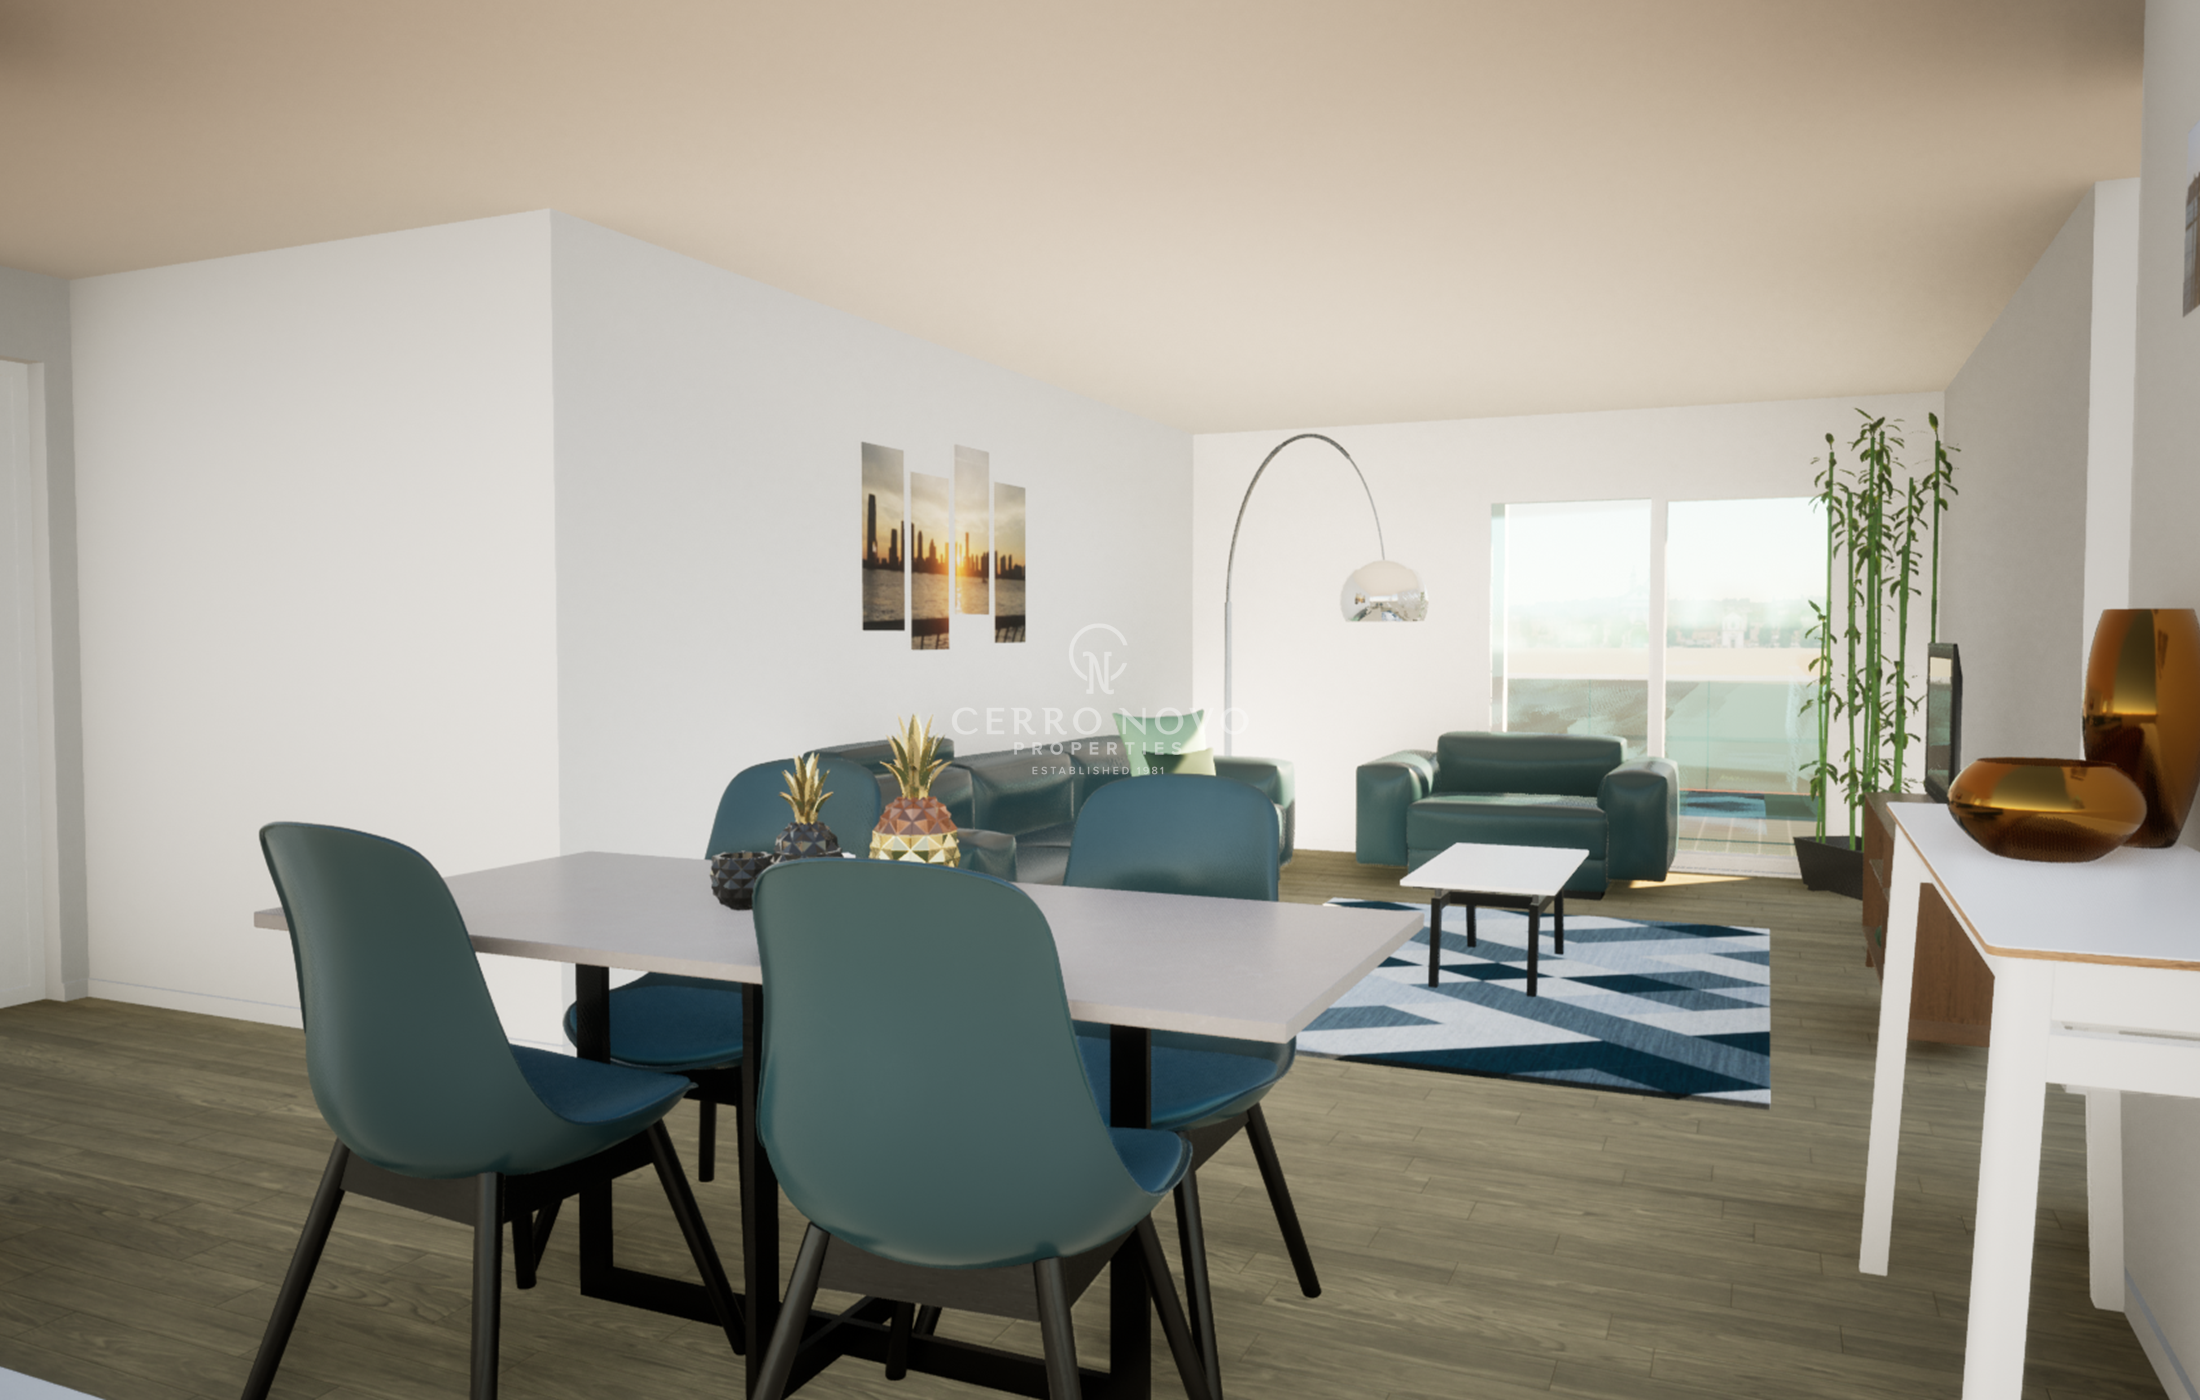 New under construction T2 apartments situated in a convenient location 